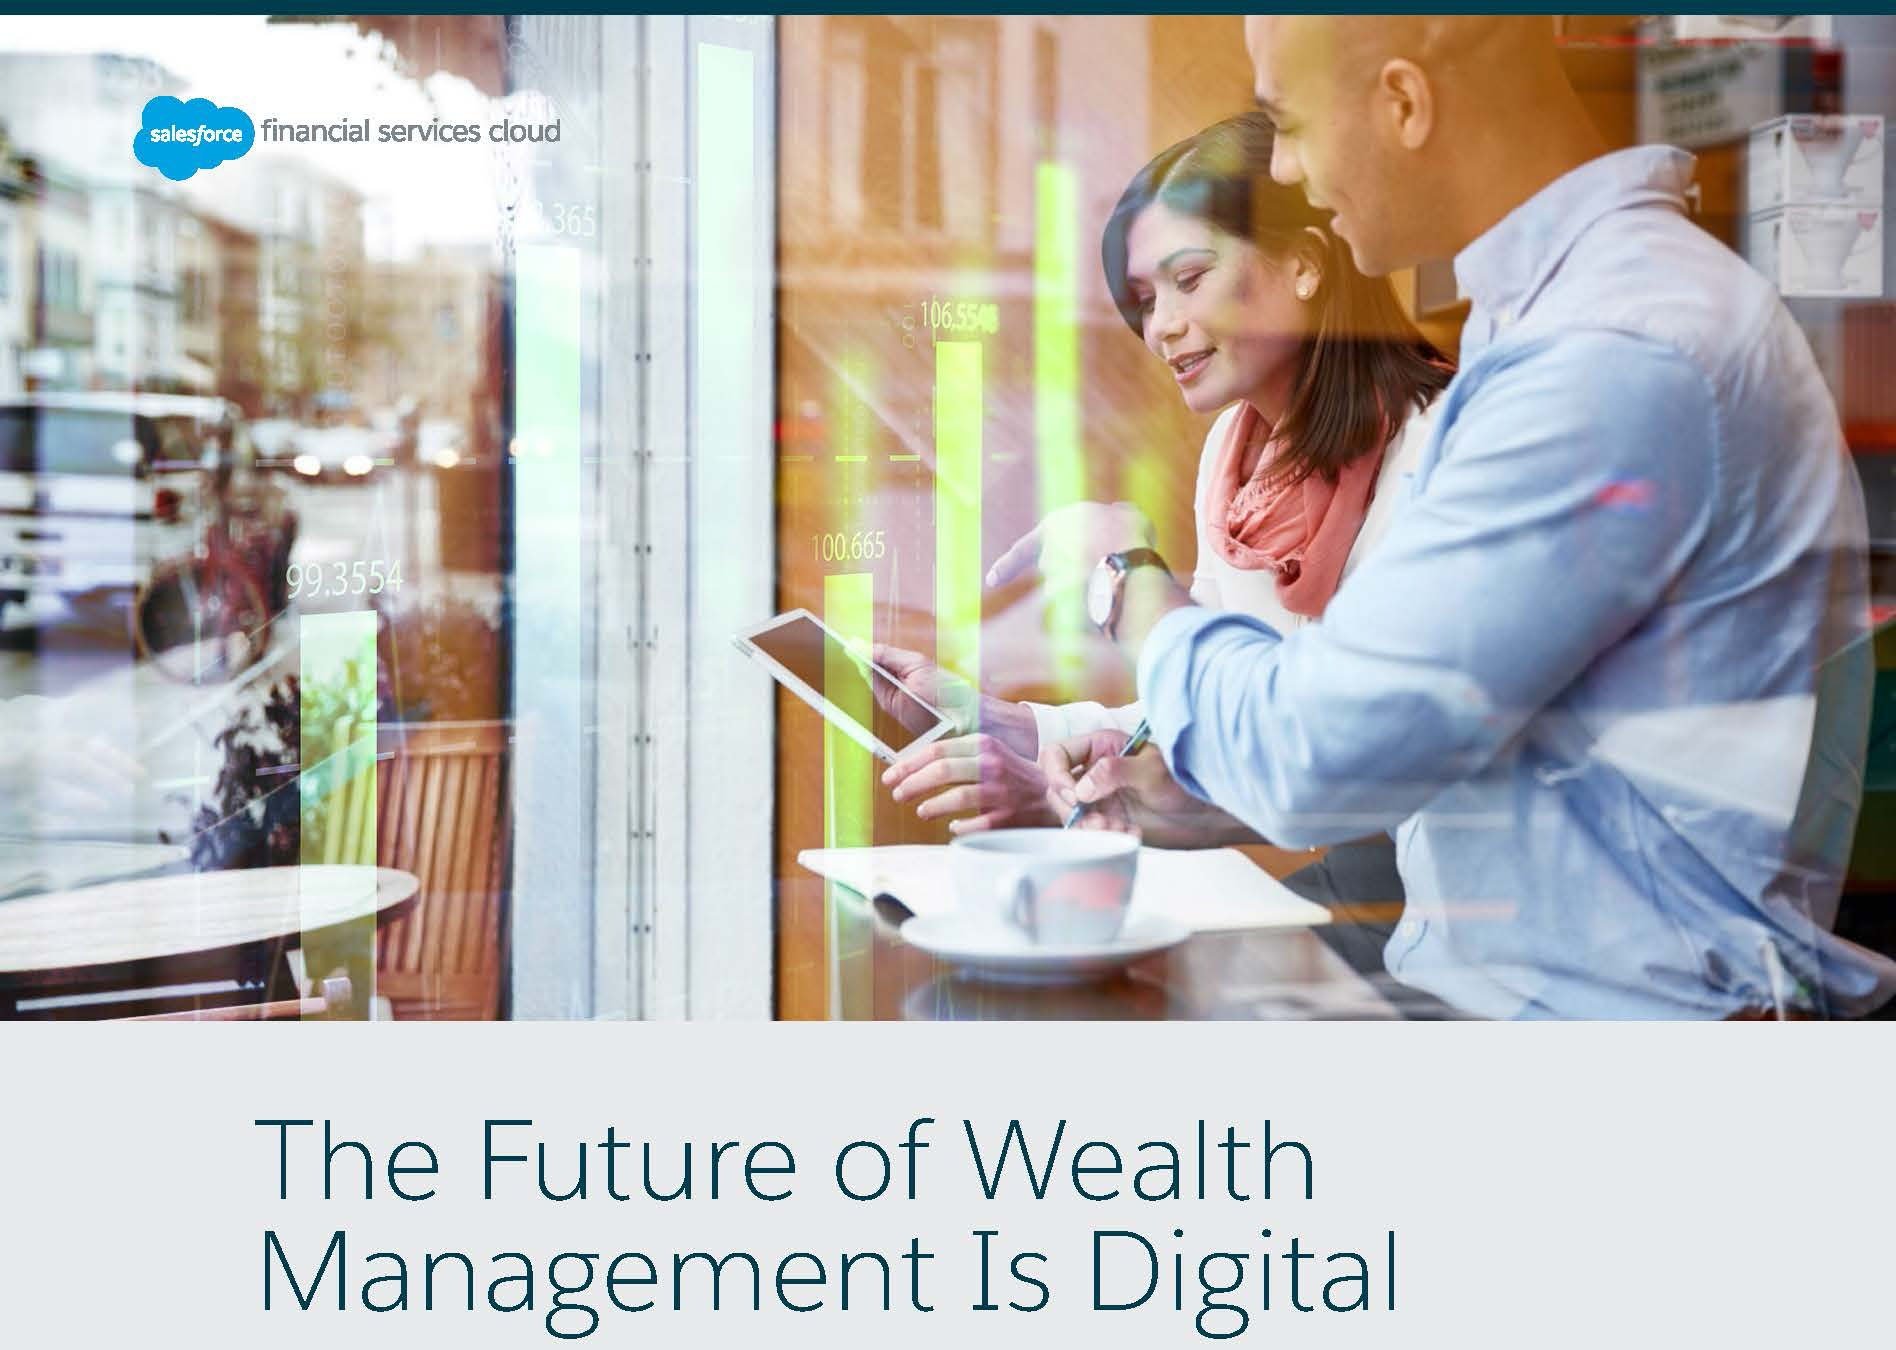 The future of wealth management is digital